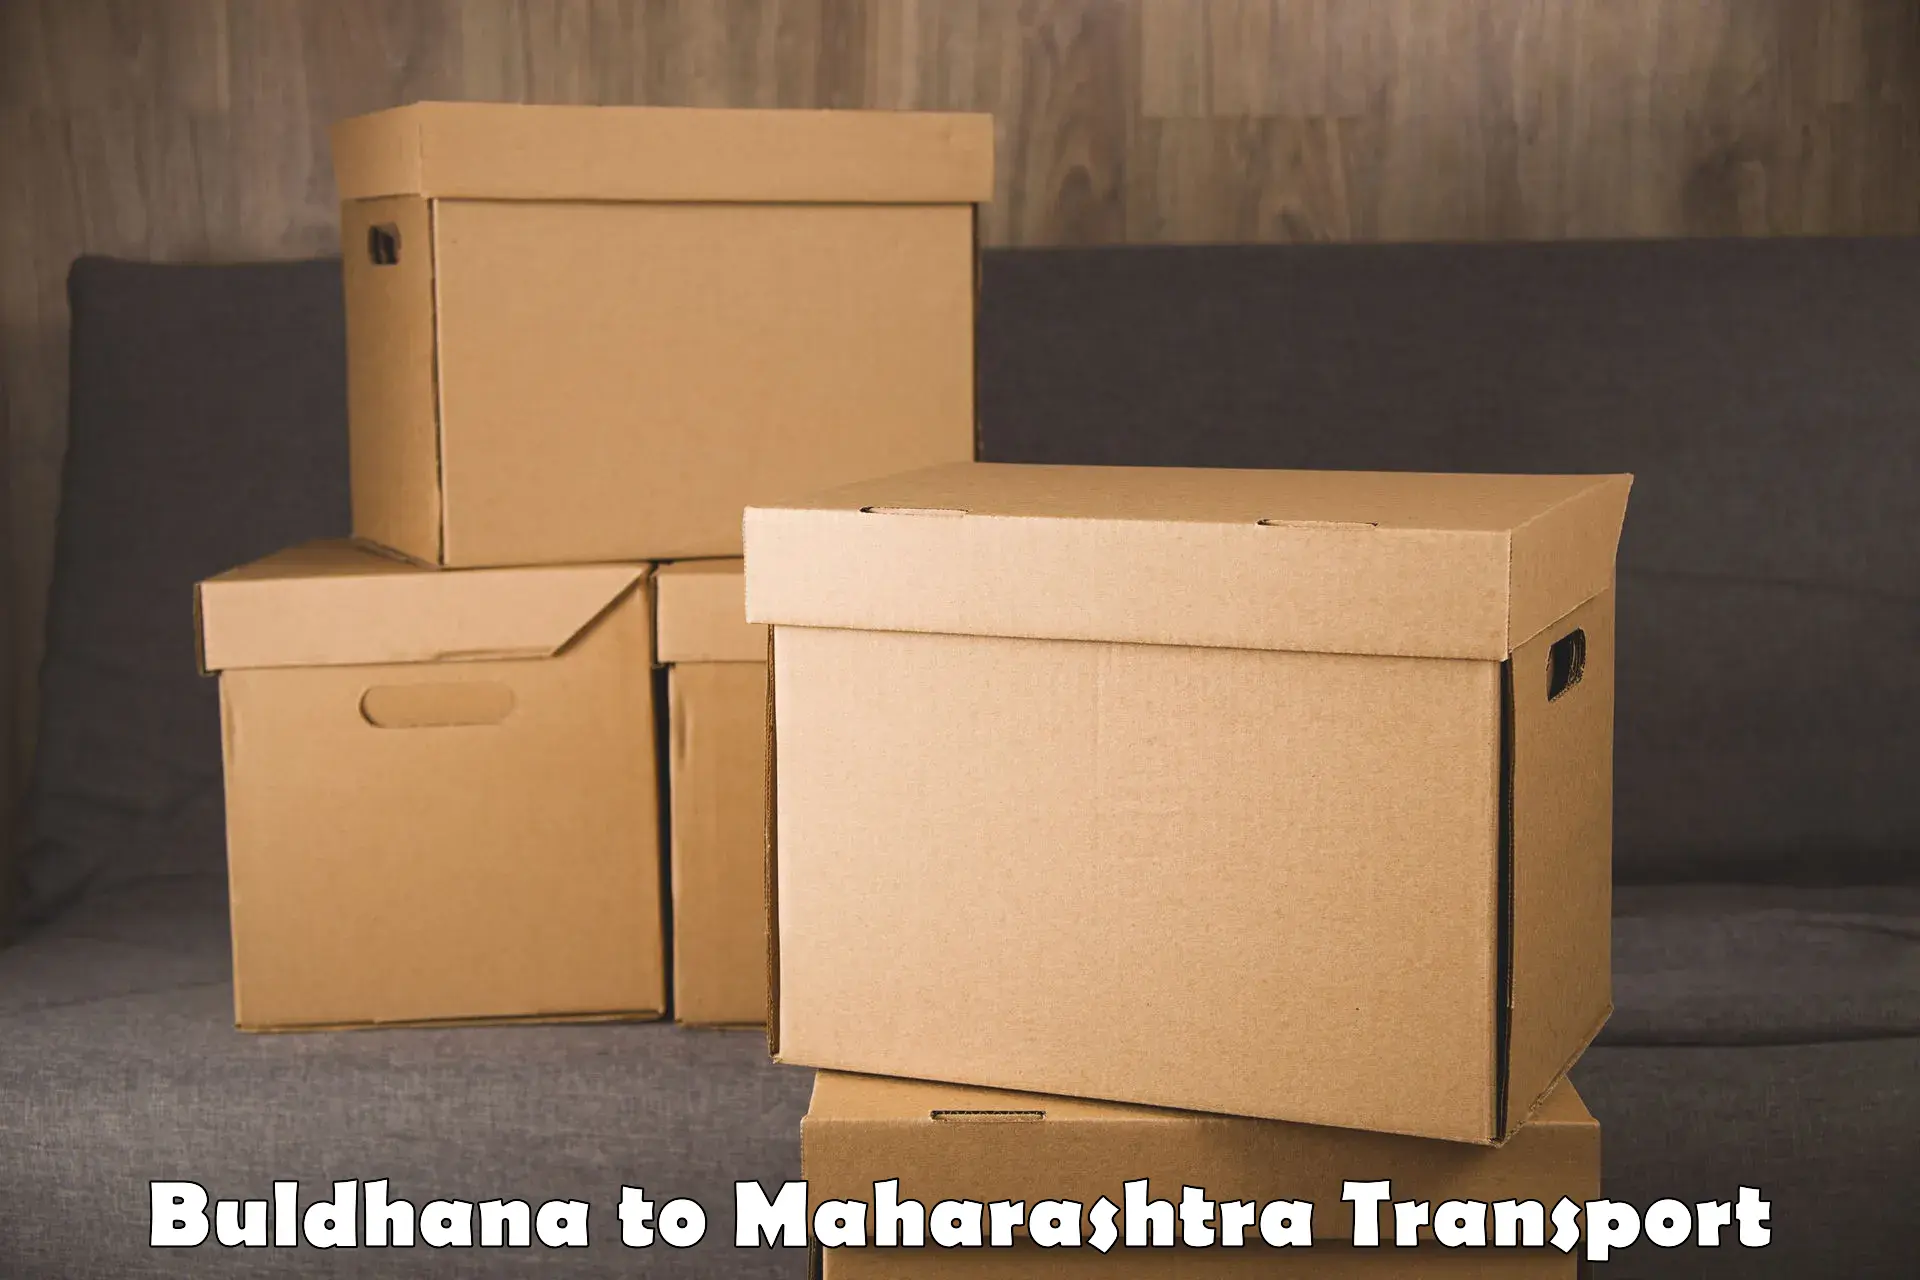 Goods delivery service Buldhana to Latur